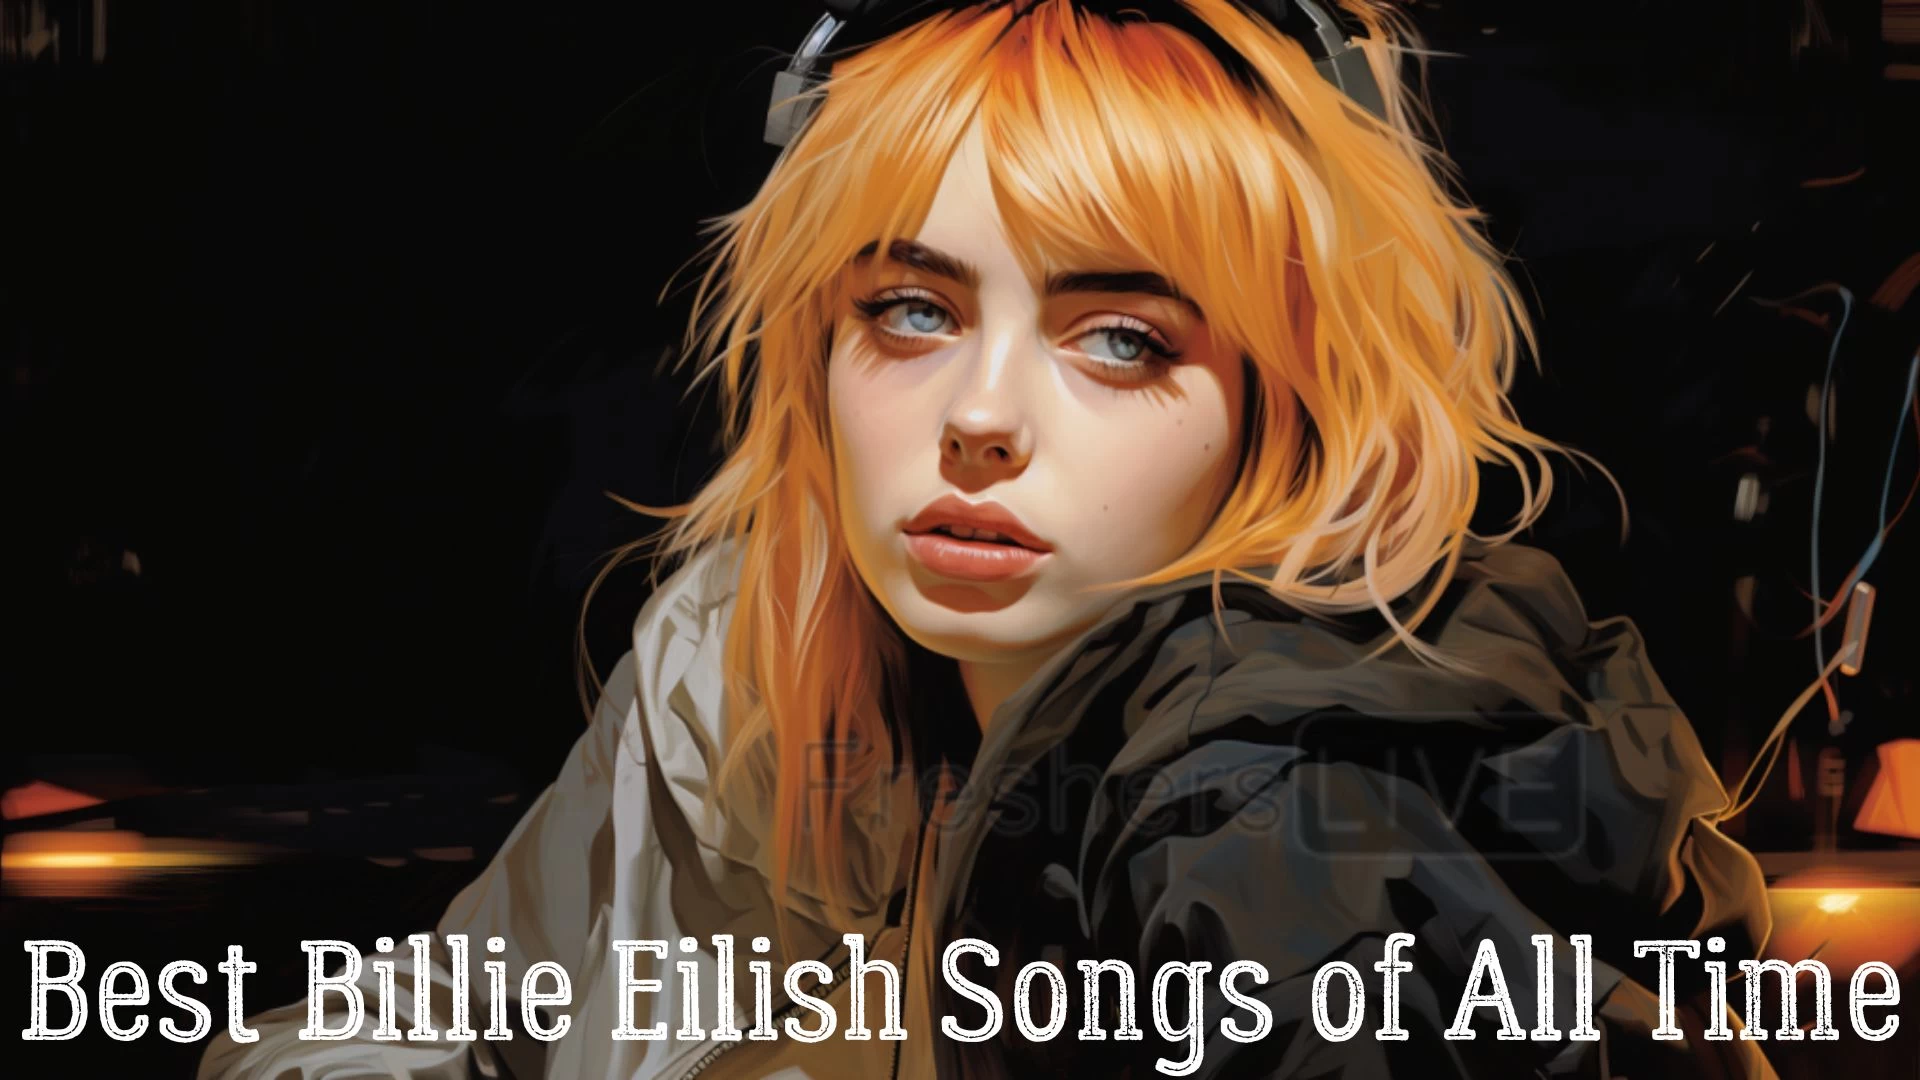 Best Billie Eilish Songs of All Time - Top 10 Captivating and Haunting Tracks